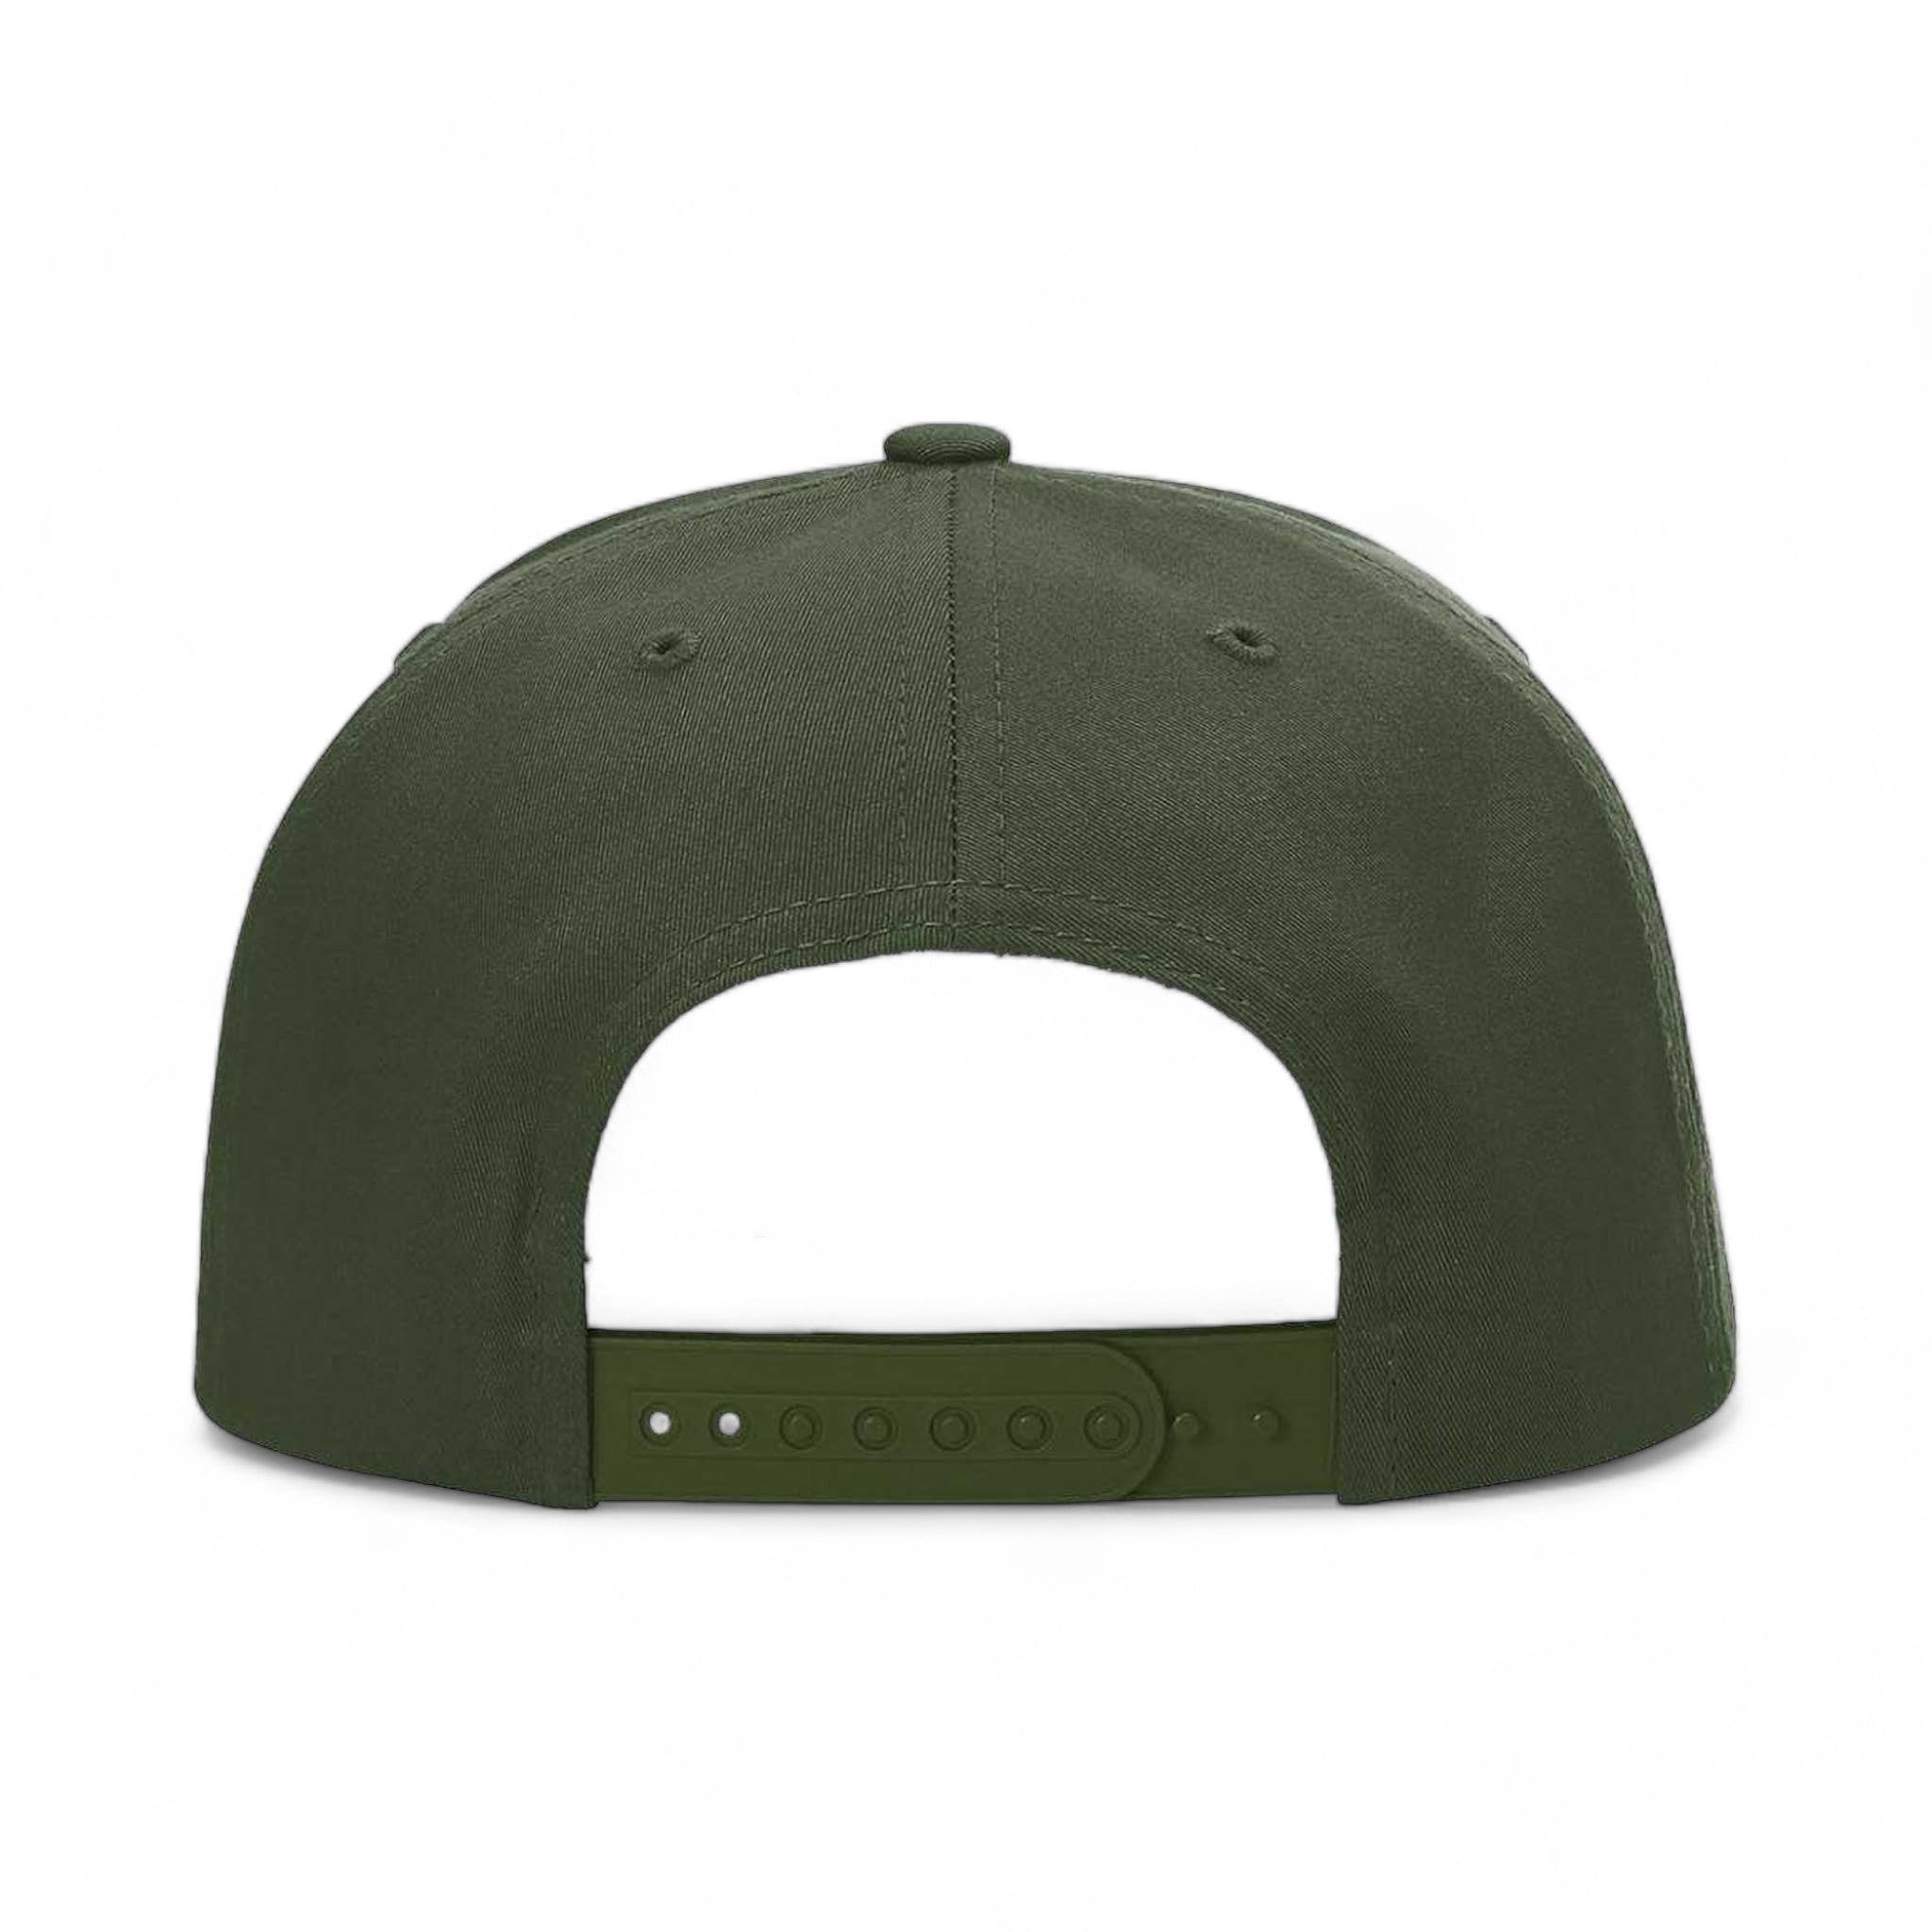 Back view of Richardson 255 custom hat in army olive